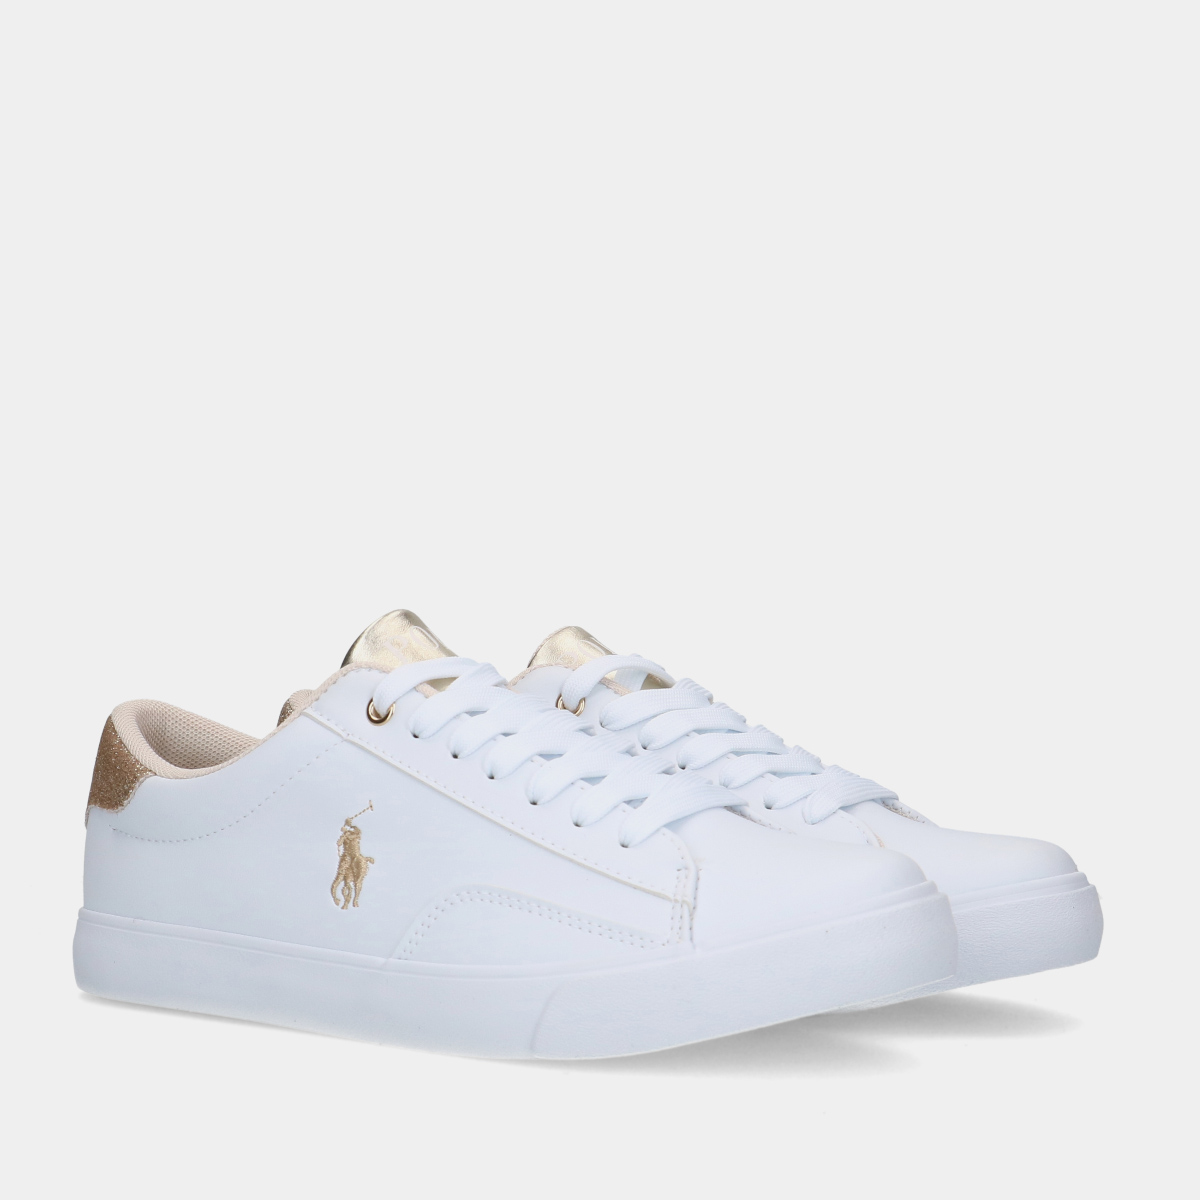 Polo Ralph Lauren Theron V White / Gold kinder sneakers